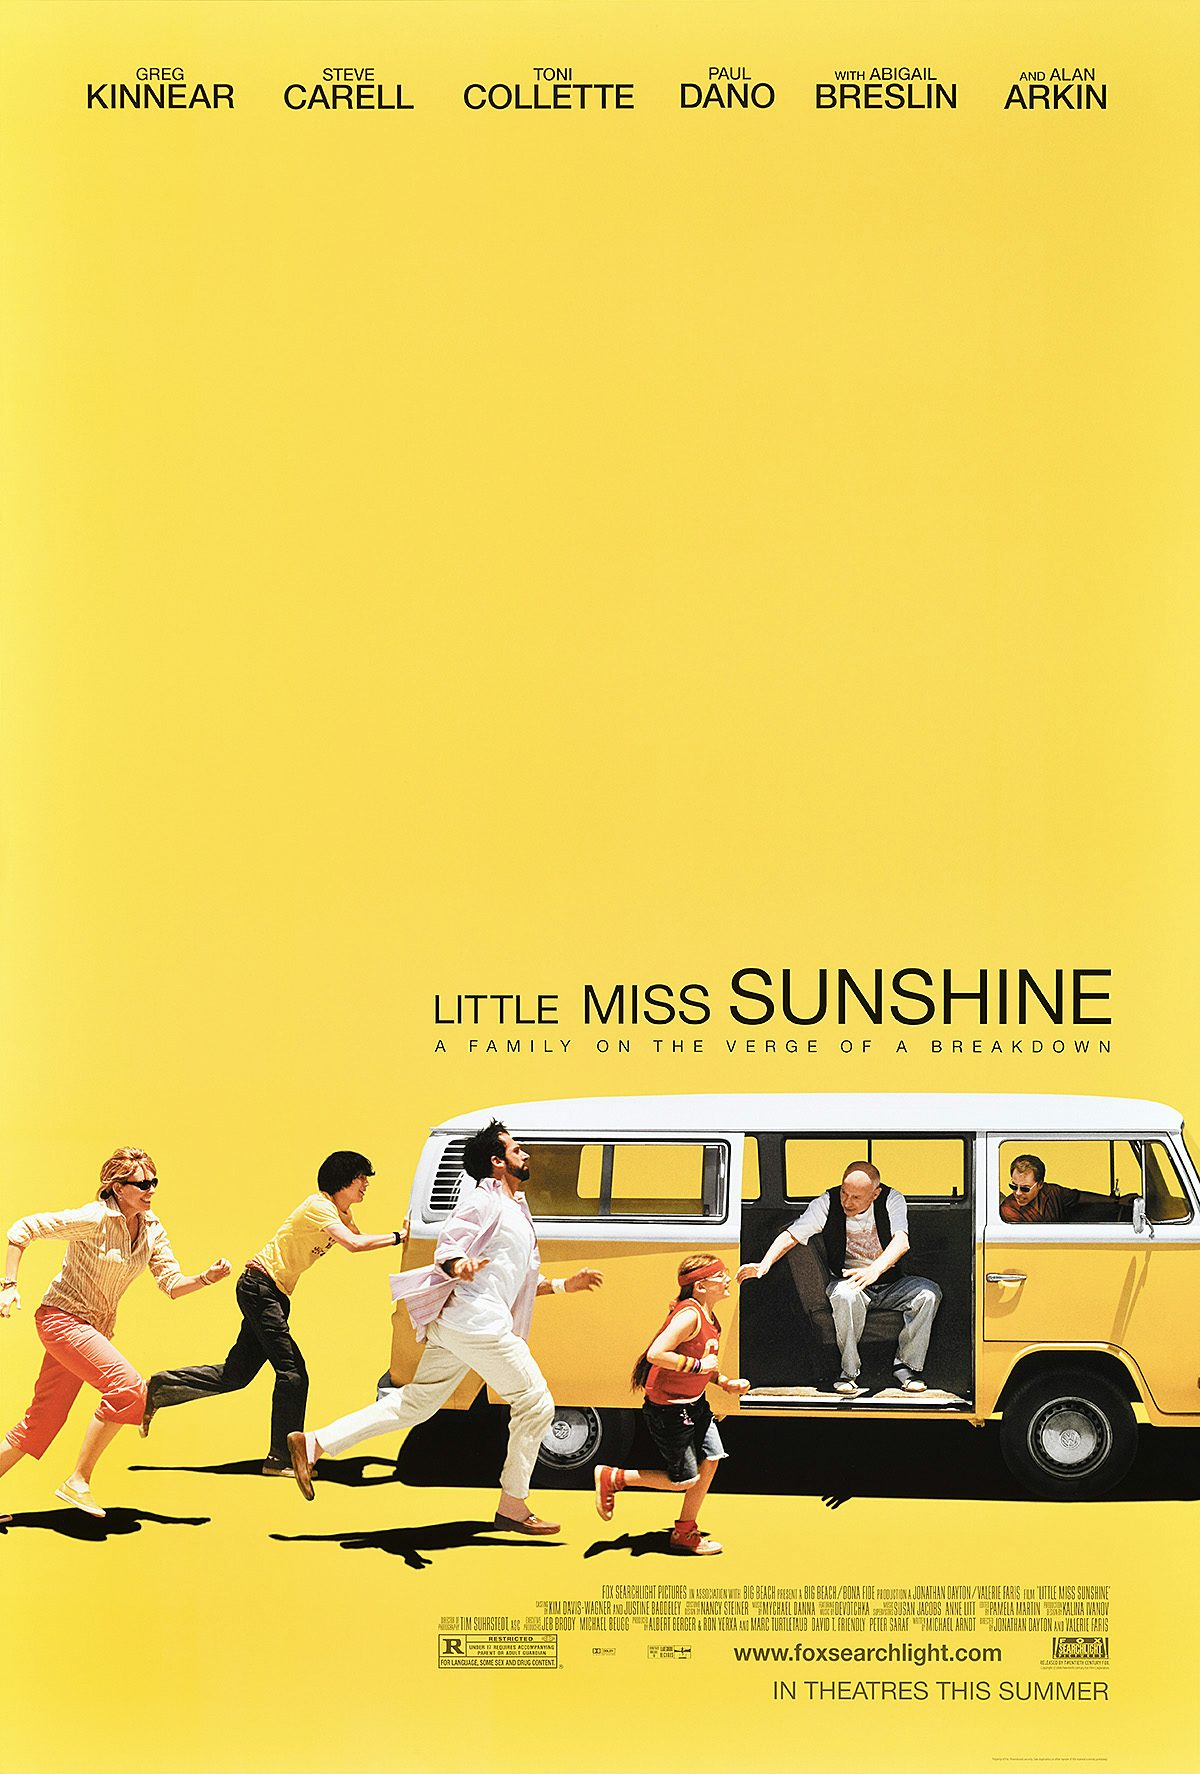 Poster design for Little Miss Sunshine, showing cut out photos of four of the film characters running towards a yellow VW campervan with two people inside. The images are laid over a bright yellow background, with the copy 'A family on the verge of breakdown'